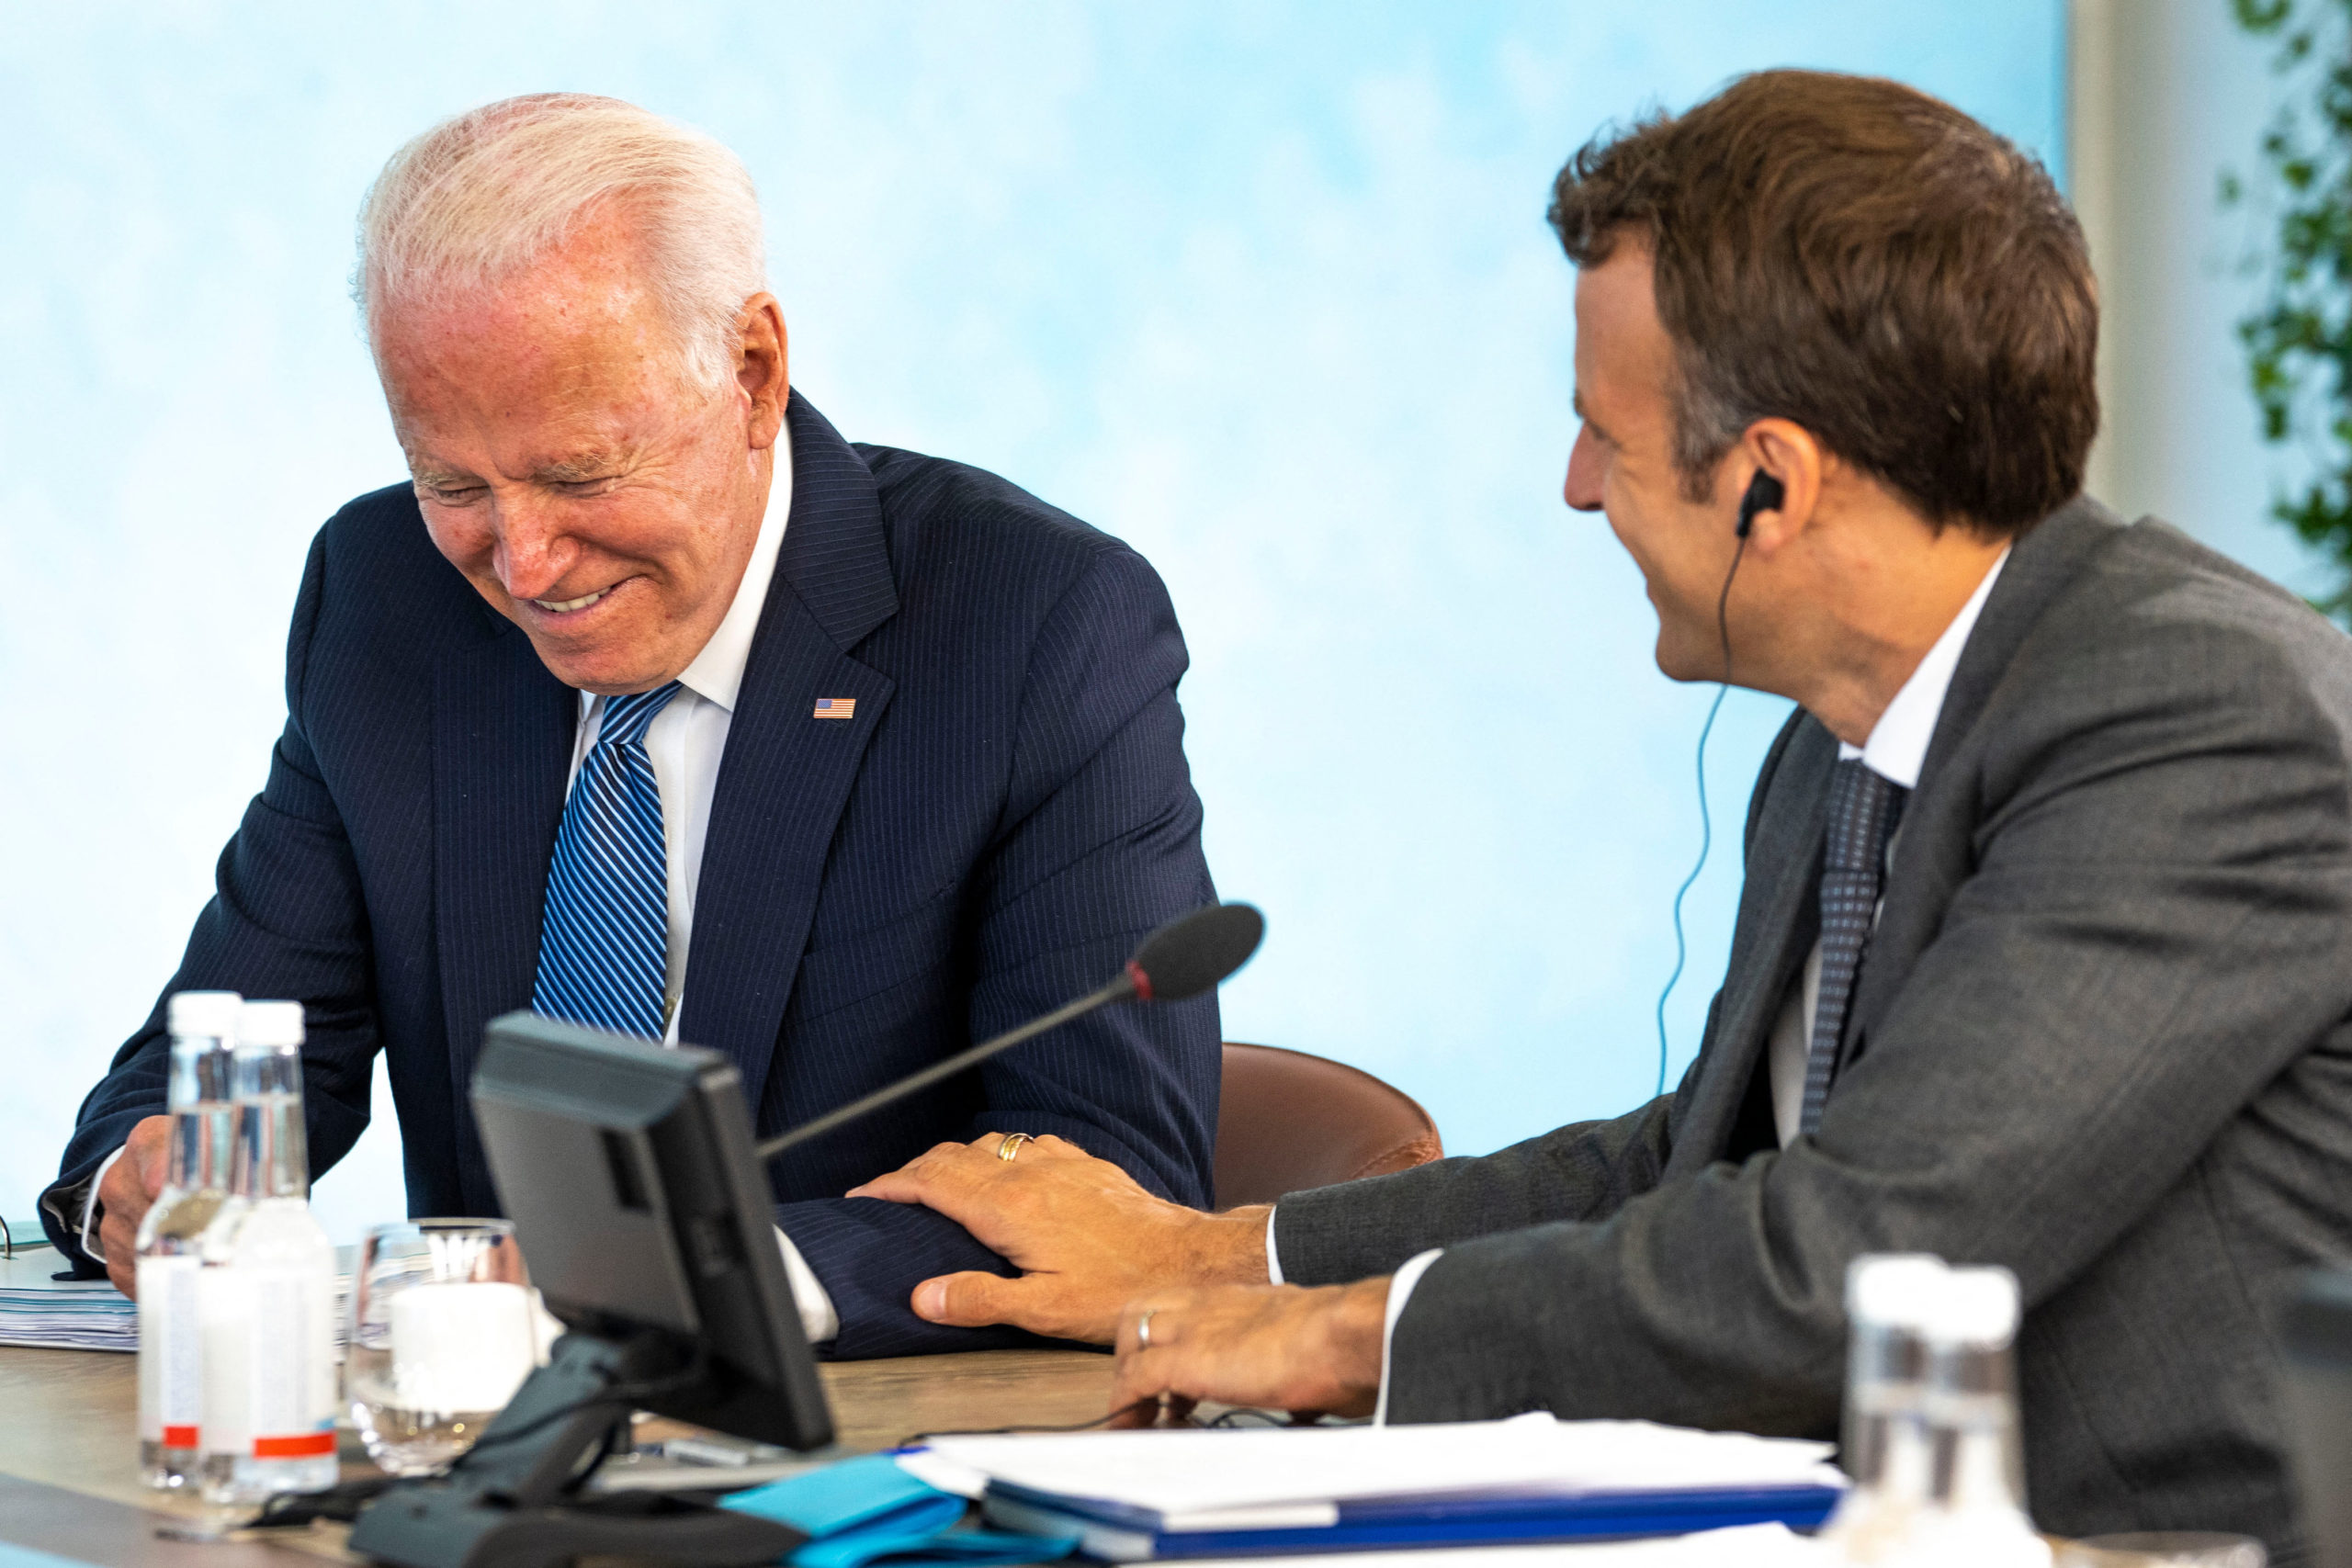 US President Joe Biden (L) talks with France's President Emmanuel Macron during a plenary session at the G7 summit in Carbis Bay, Cornwall on June 13, 2021. (Photo by Doug Mills / POOL / AFP) (Photo by DOUG MILLS/POOL/AFP via Getty Images)